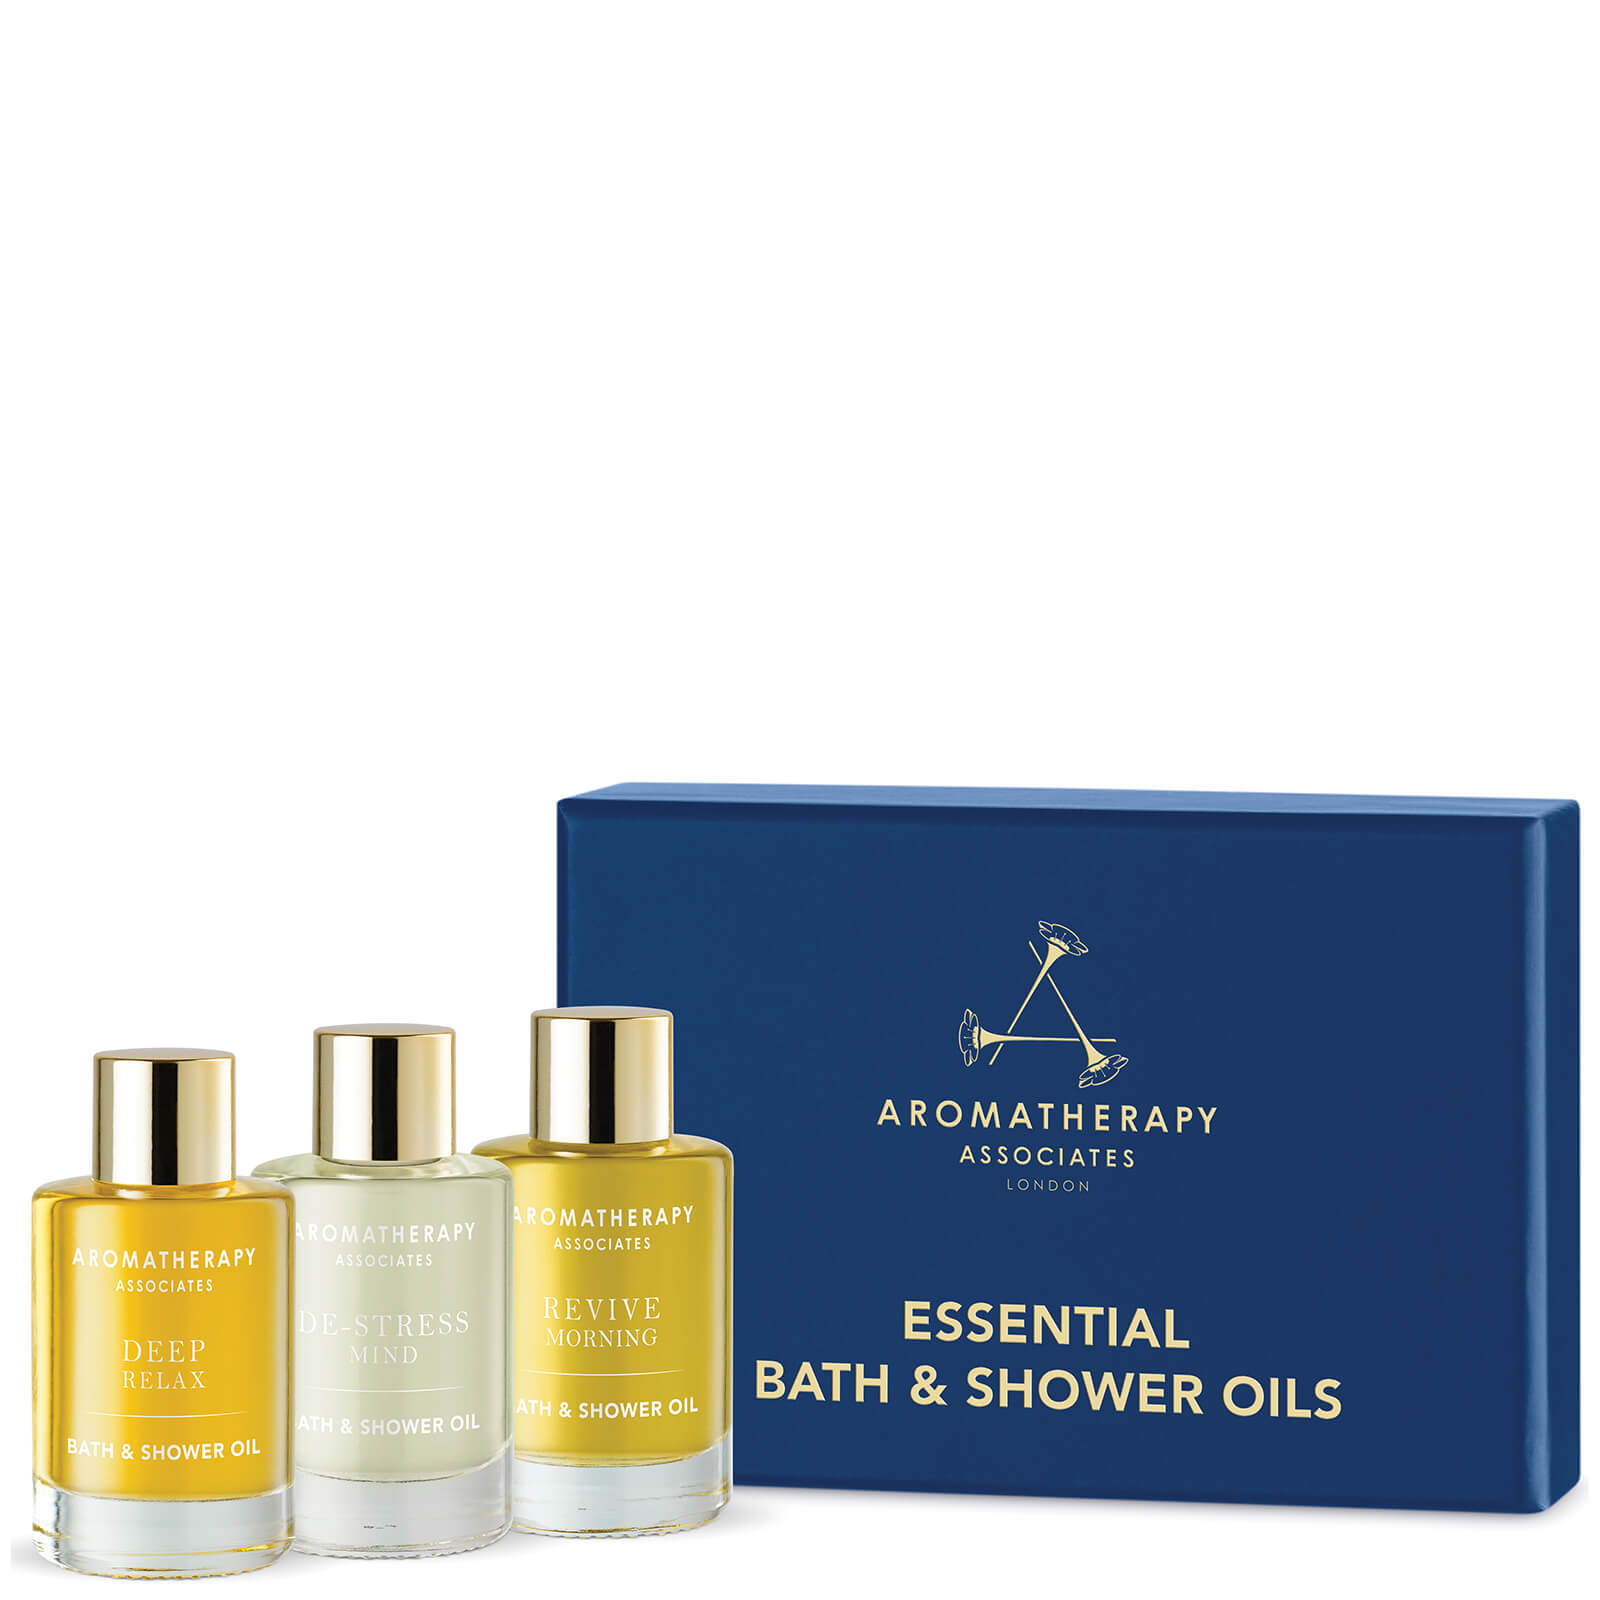 Look Fantastic coupon: Aromatherapy Associates Essential Bath and Shower Oils 3x .31oz